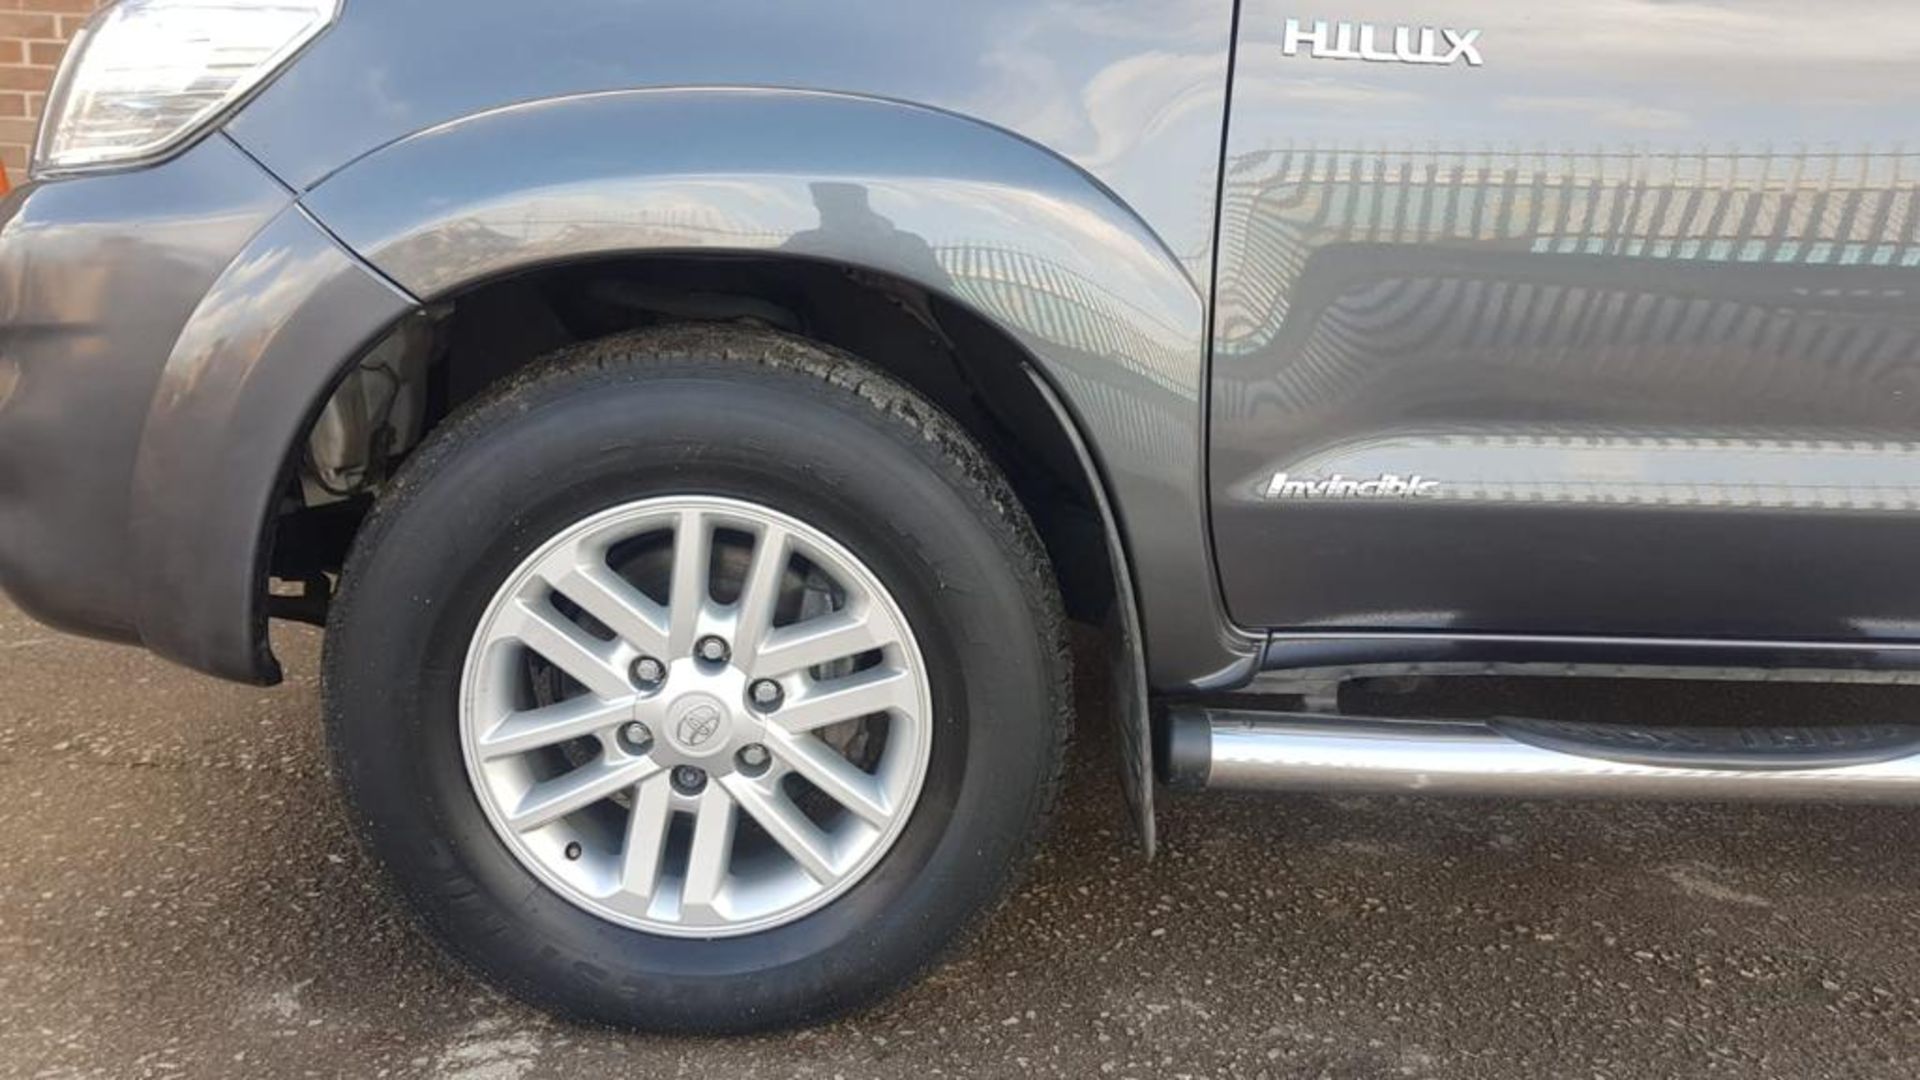 2015/64 REG TOYOTA HILUX INVINCIBLE D-4D 4X4 GREY DIESEL LIGHT UTILITY, SHOWING 1 FORMER KEEPER - Image 13 of 22